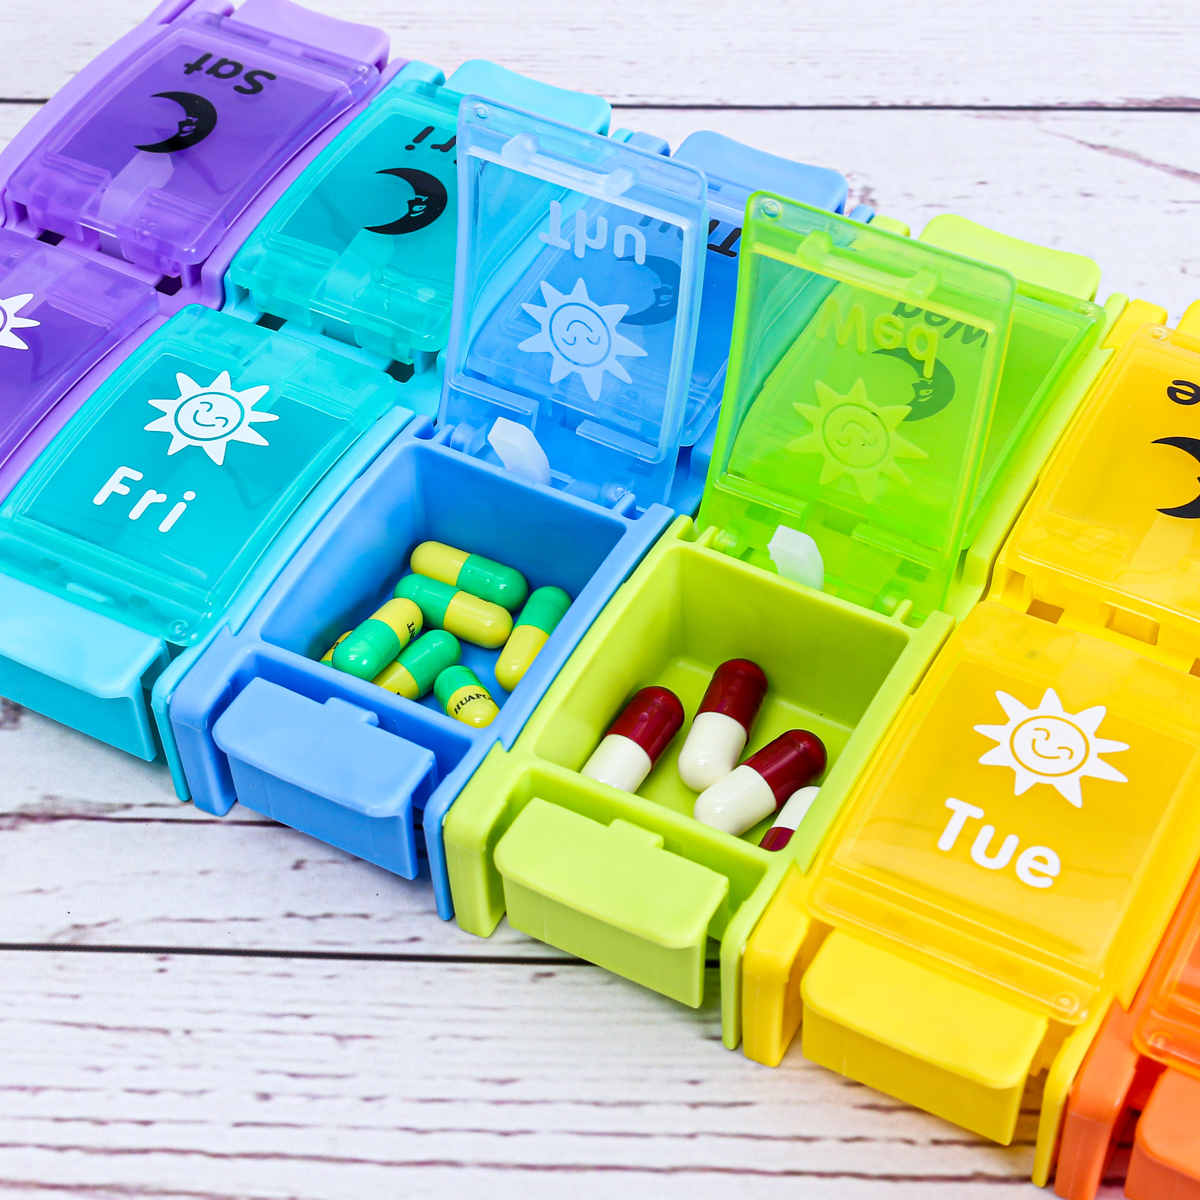 

14Grids Daily Pill Box Tablet Organizer Weekly Pill Case 7days Tablet Container